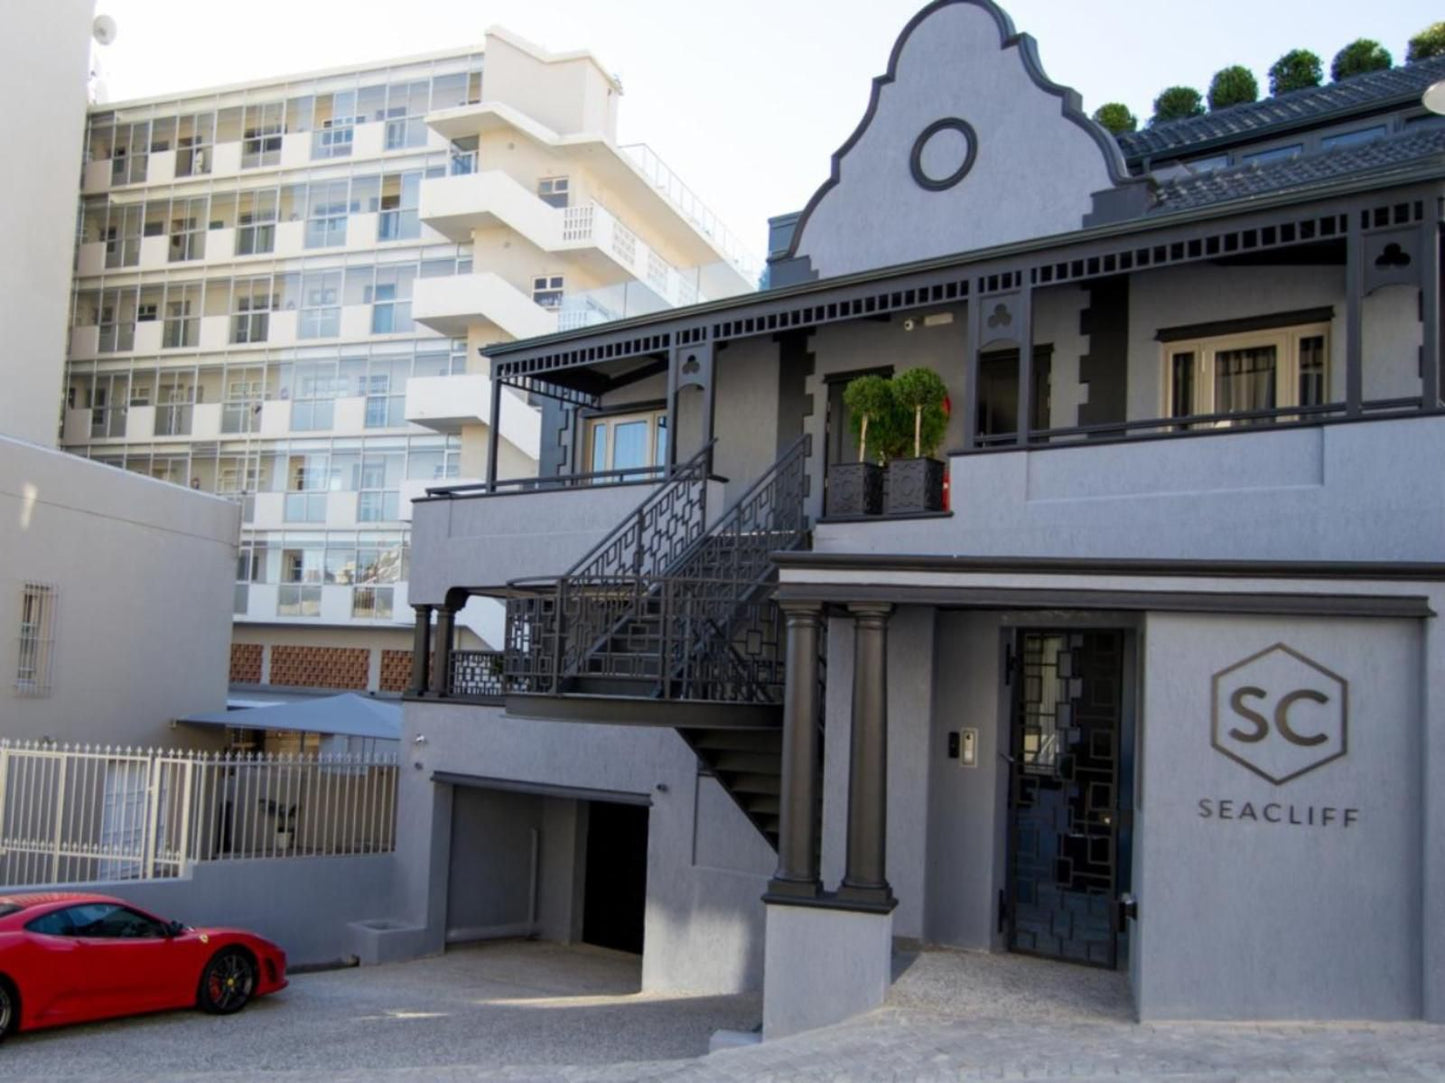 Seacliff Apartments Bantry Bay Cape Town Western Cape South Africa Building, Architecture, House, Car, Vehicle